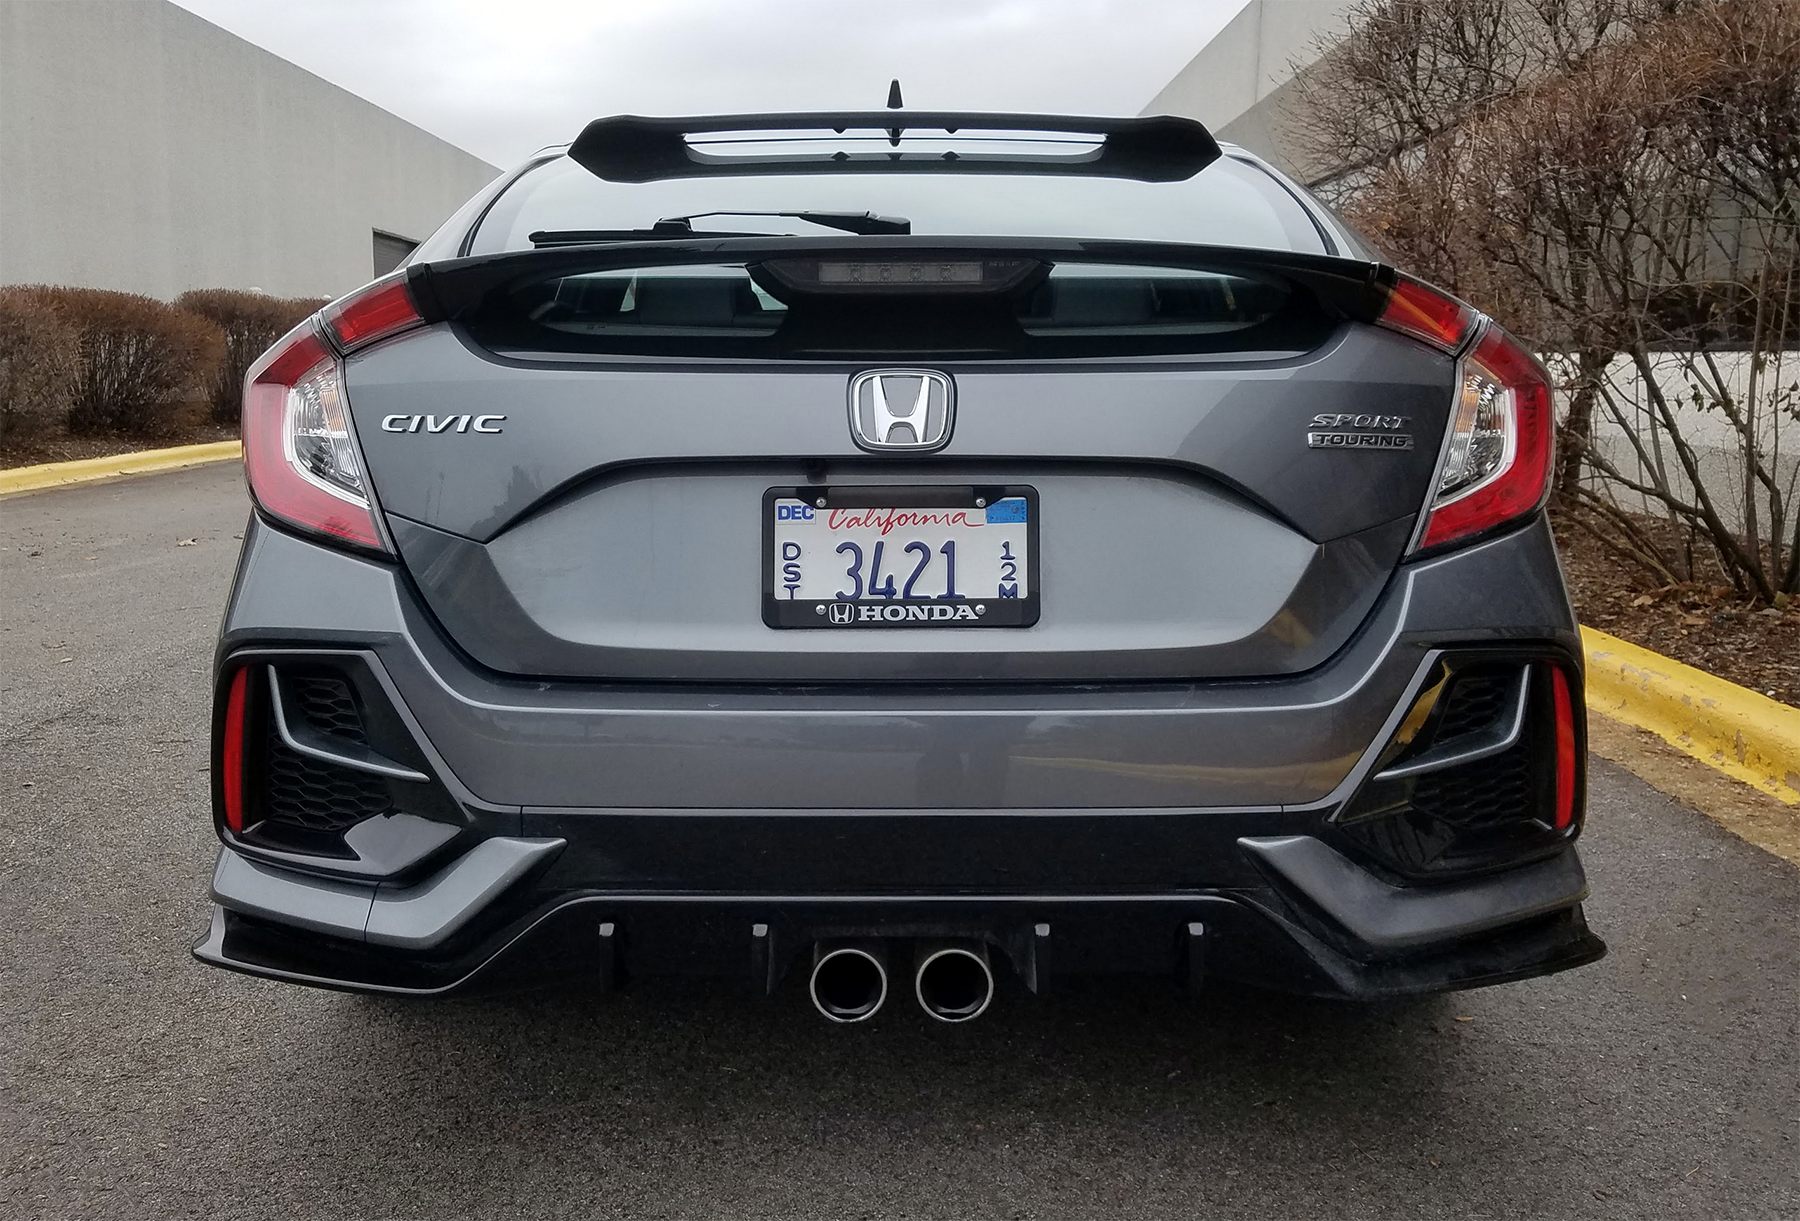 2020 Honda Civic Hatchback Sport Touring The Daily Drive Consumer Guide The Daily Drive Consumer Guide